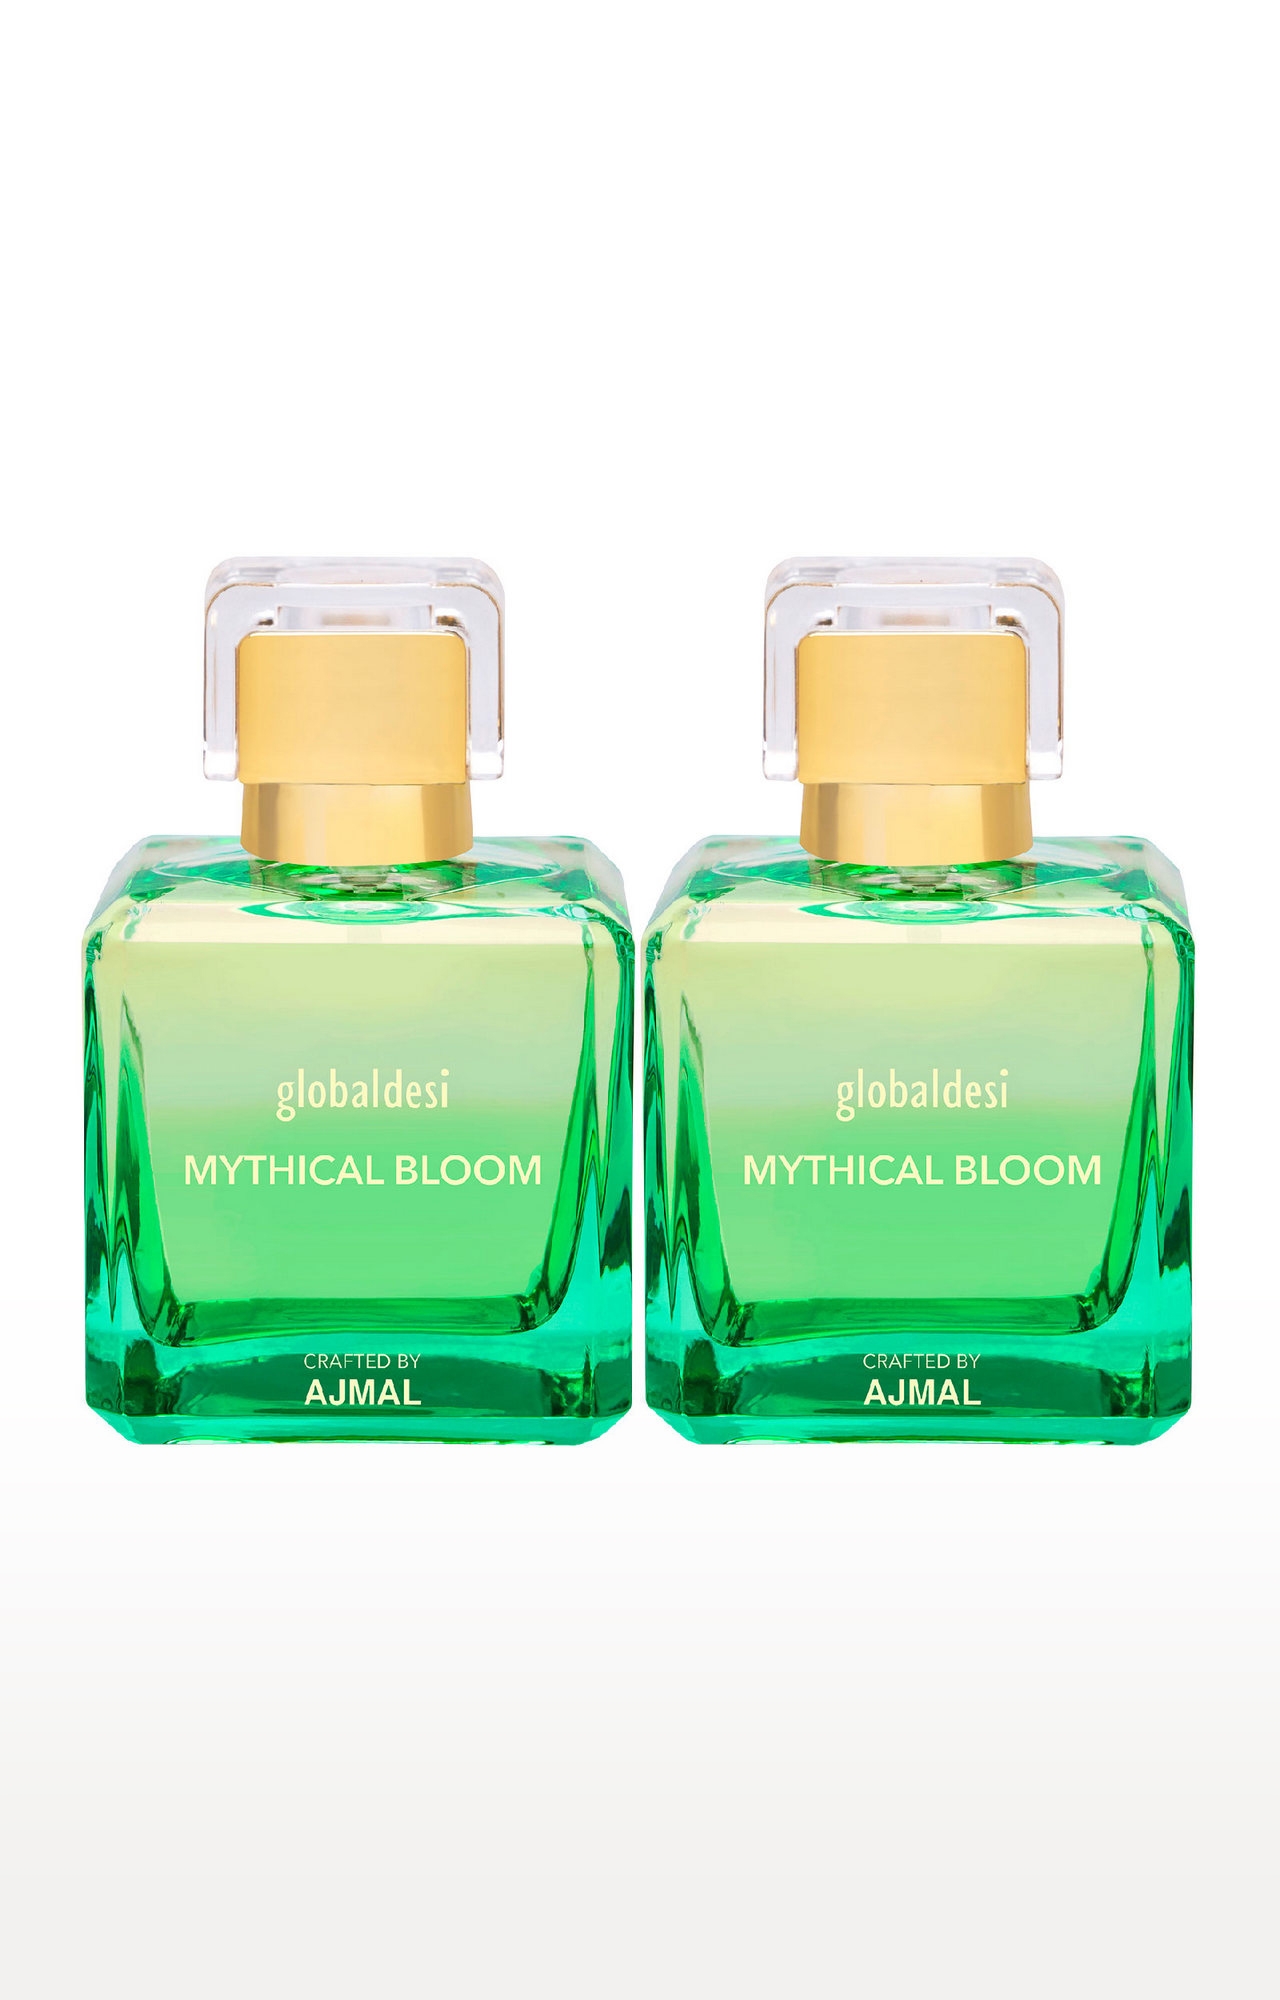 Global Desi Crafted By Ajmal | Global Mythical Bloom Pack of 2 Eau De Parfum 100ML for Women Crafted by Ajmal + 2 Parfum Testers